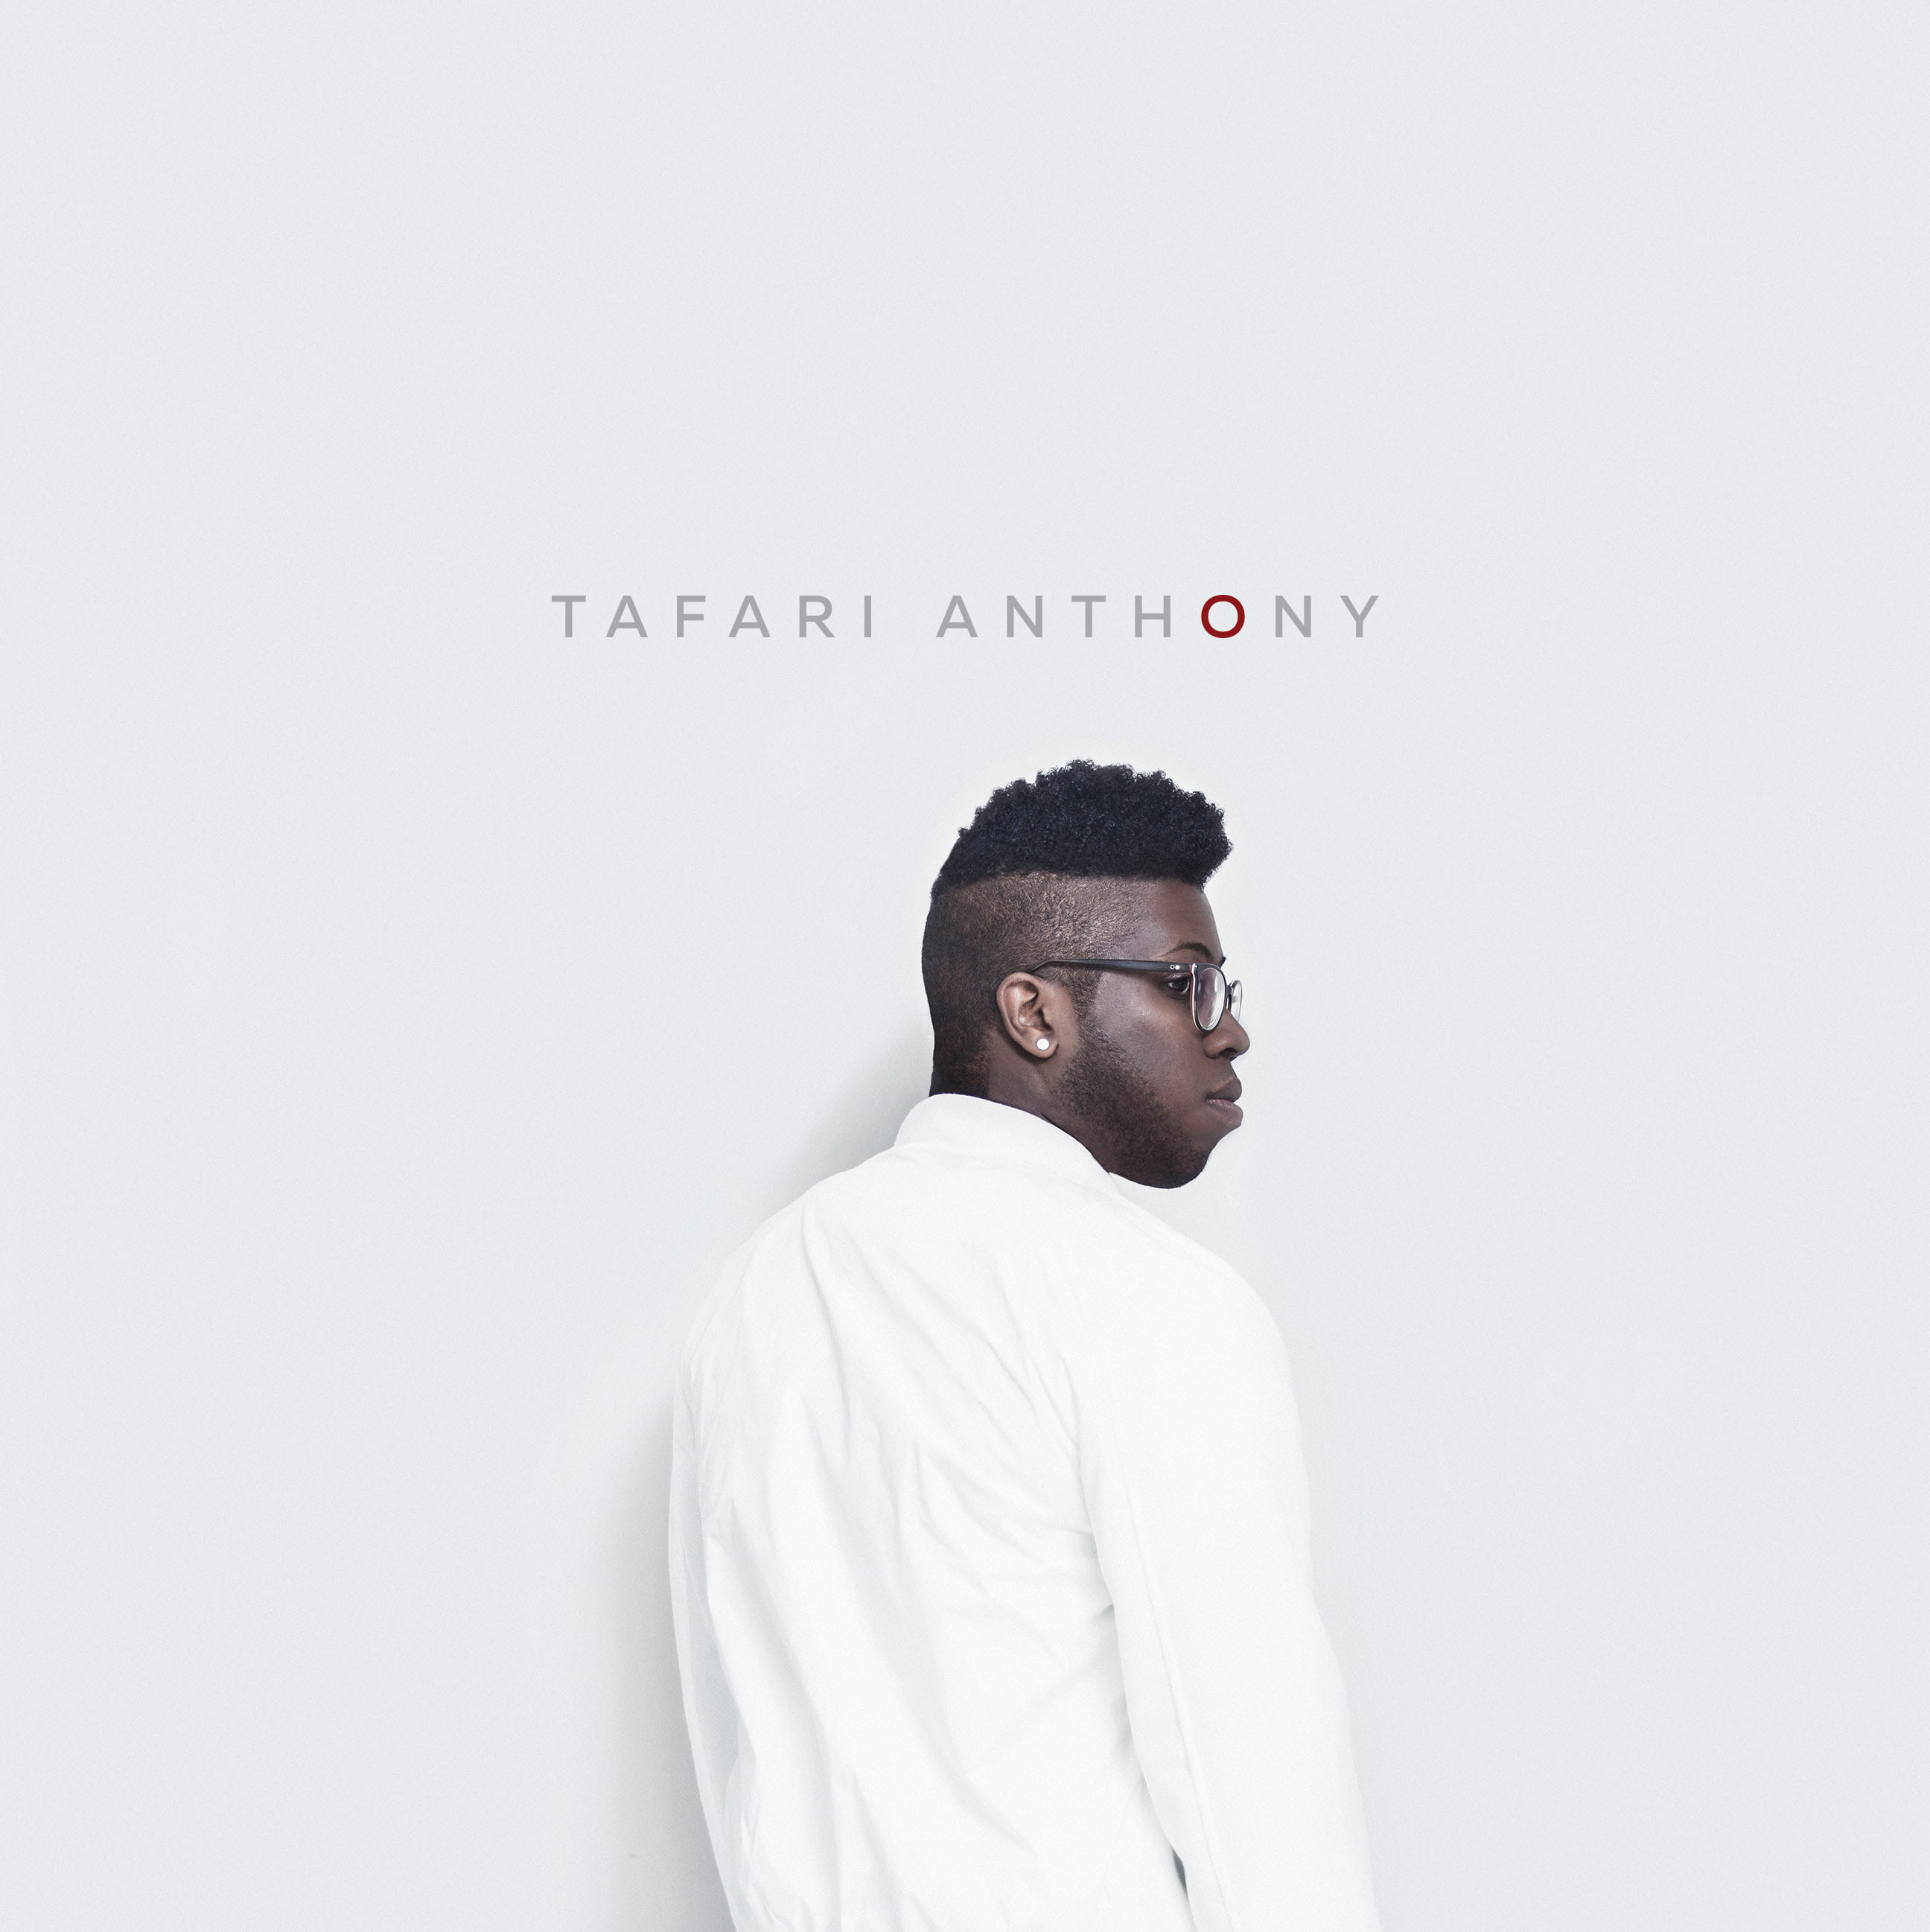 TAFARI ANTHONY MERGES SOUL AND POP WITH NEW DIE FOR YOU EP